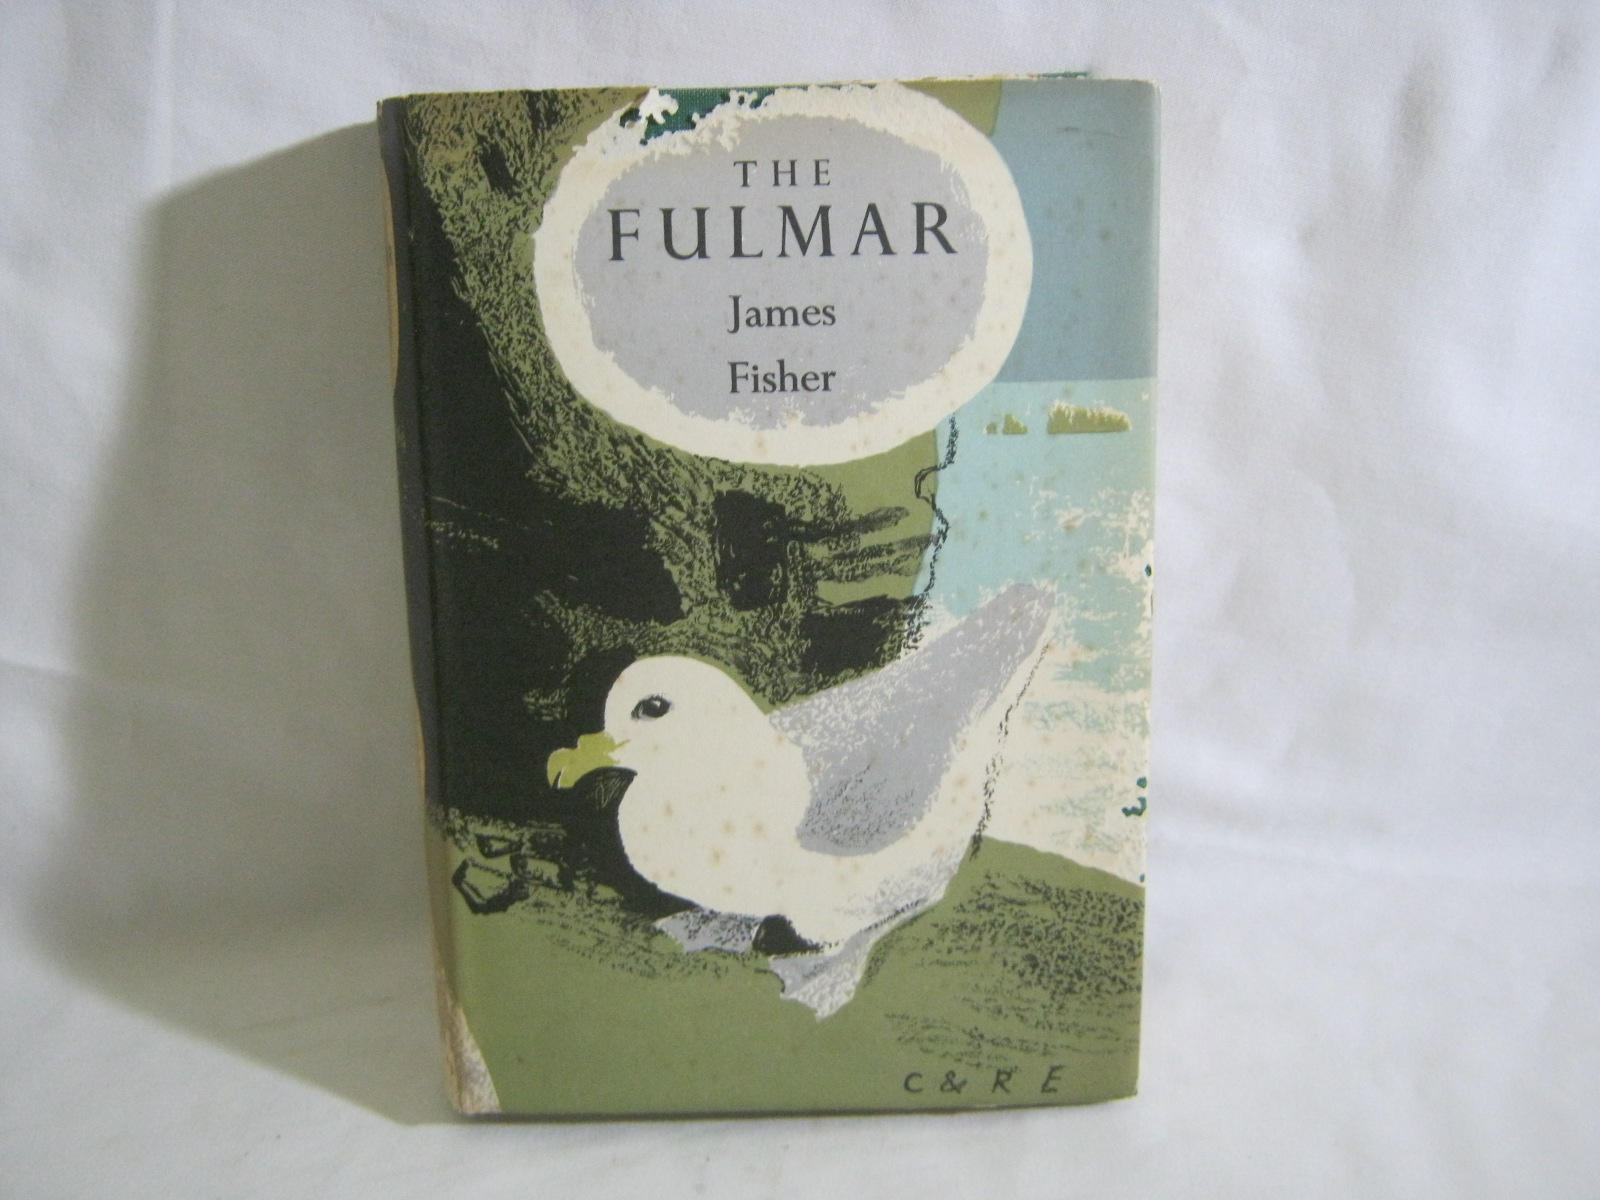 JAMES FISHER: THE FULMAR, 1952, 1st edn, New Naturalist Monograph No 6, orig cl gt, d/w